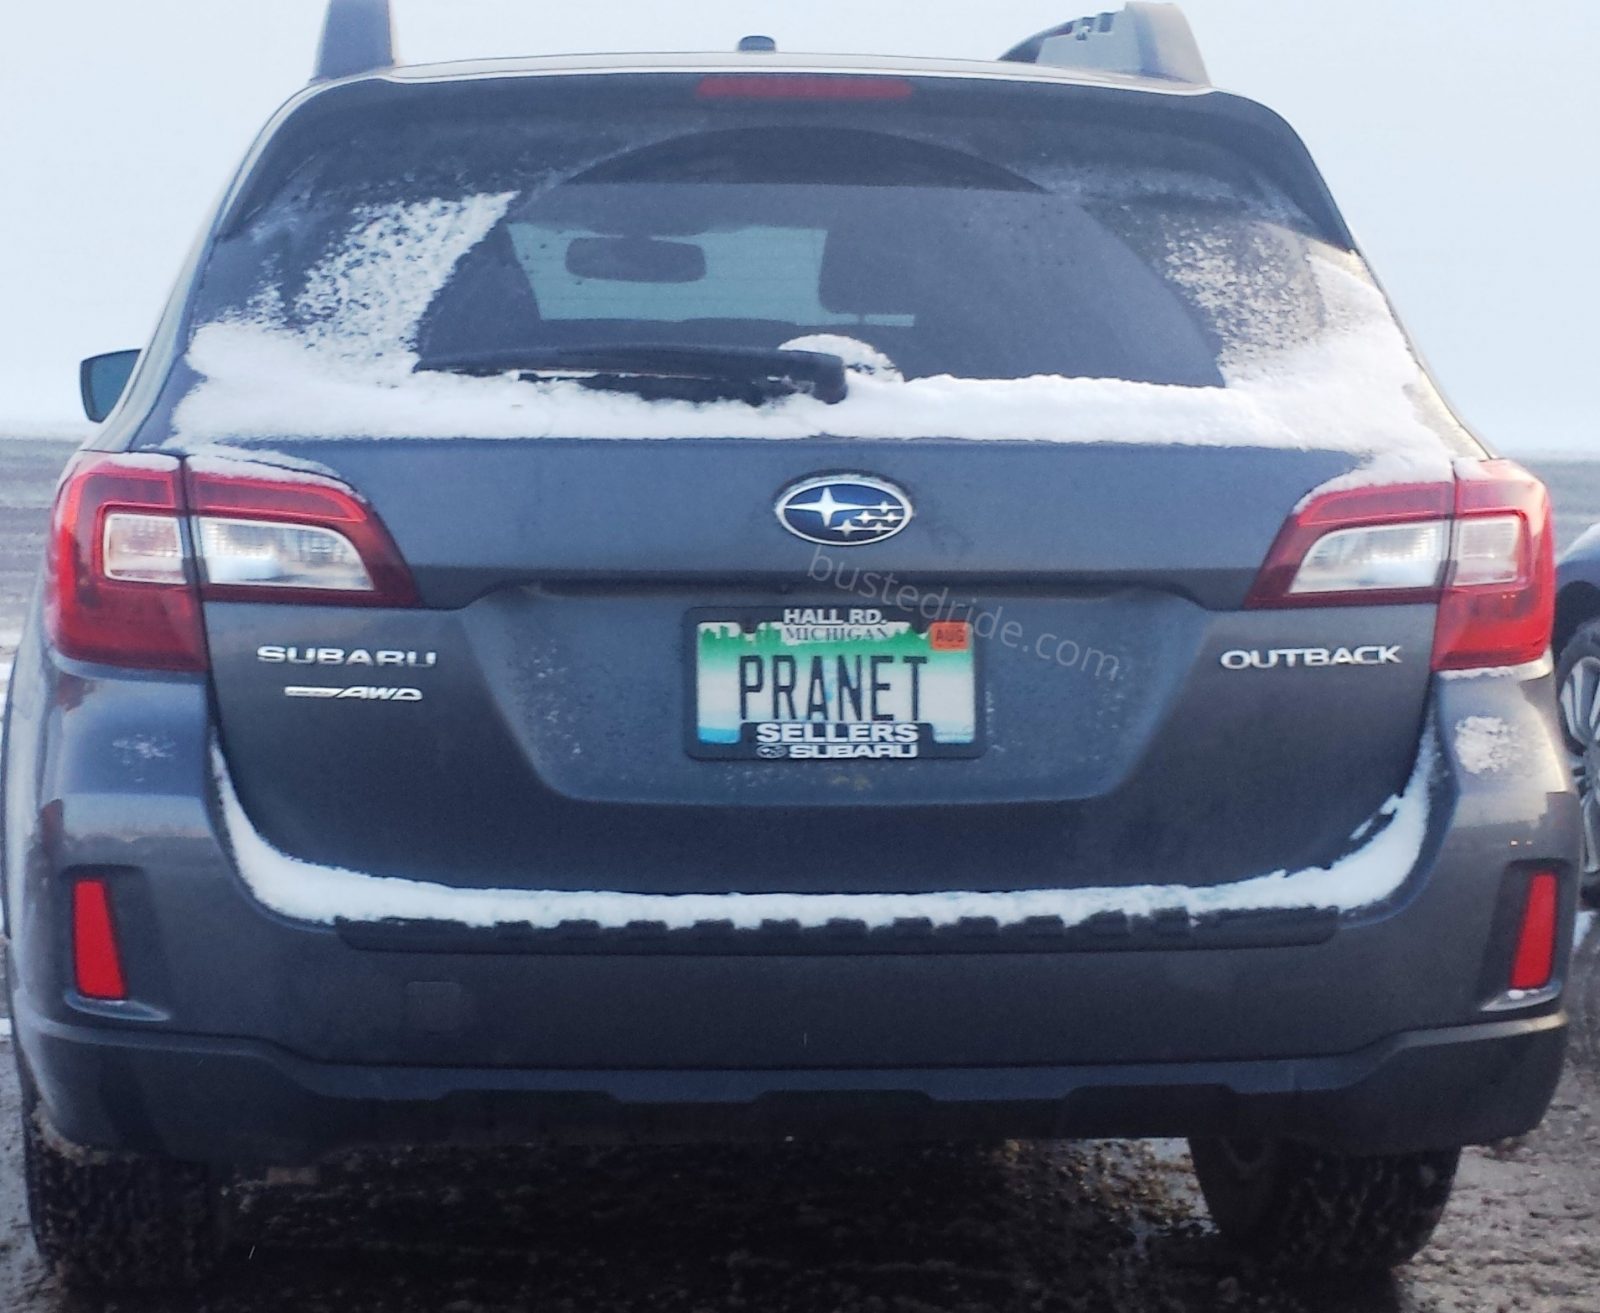 PRANET - Vanity License Plate by Busted Ride